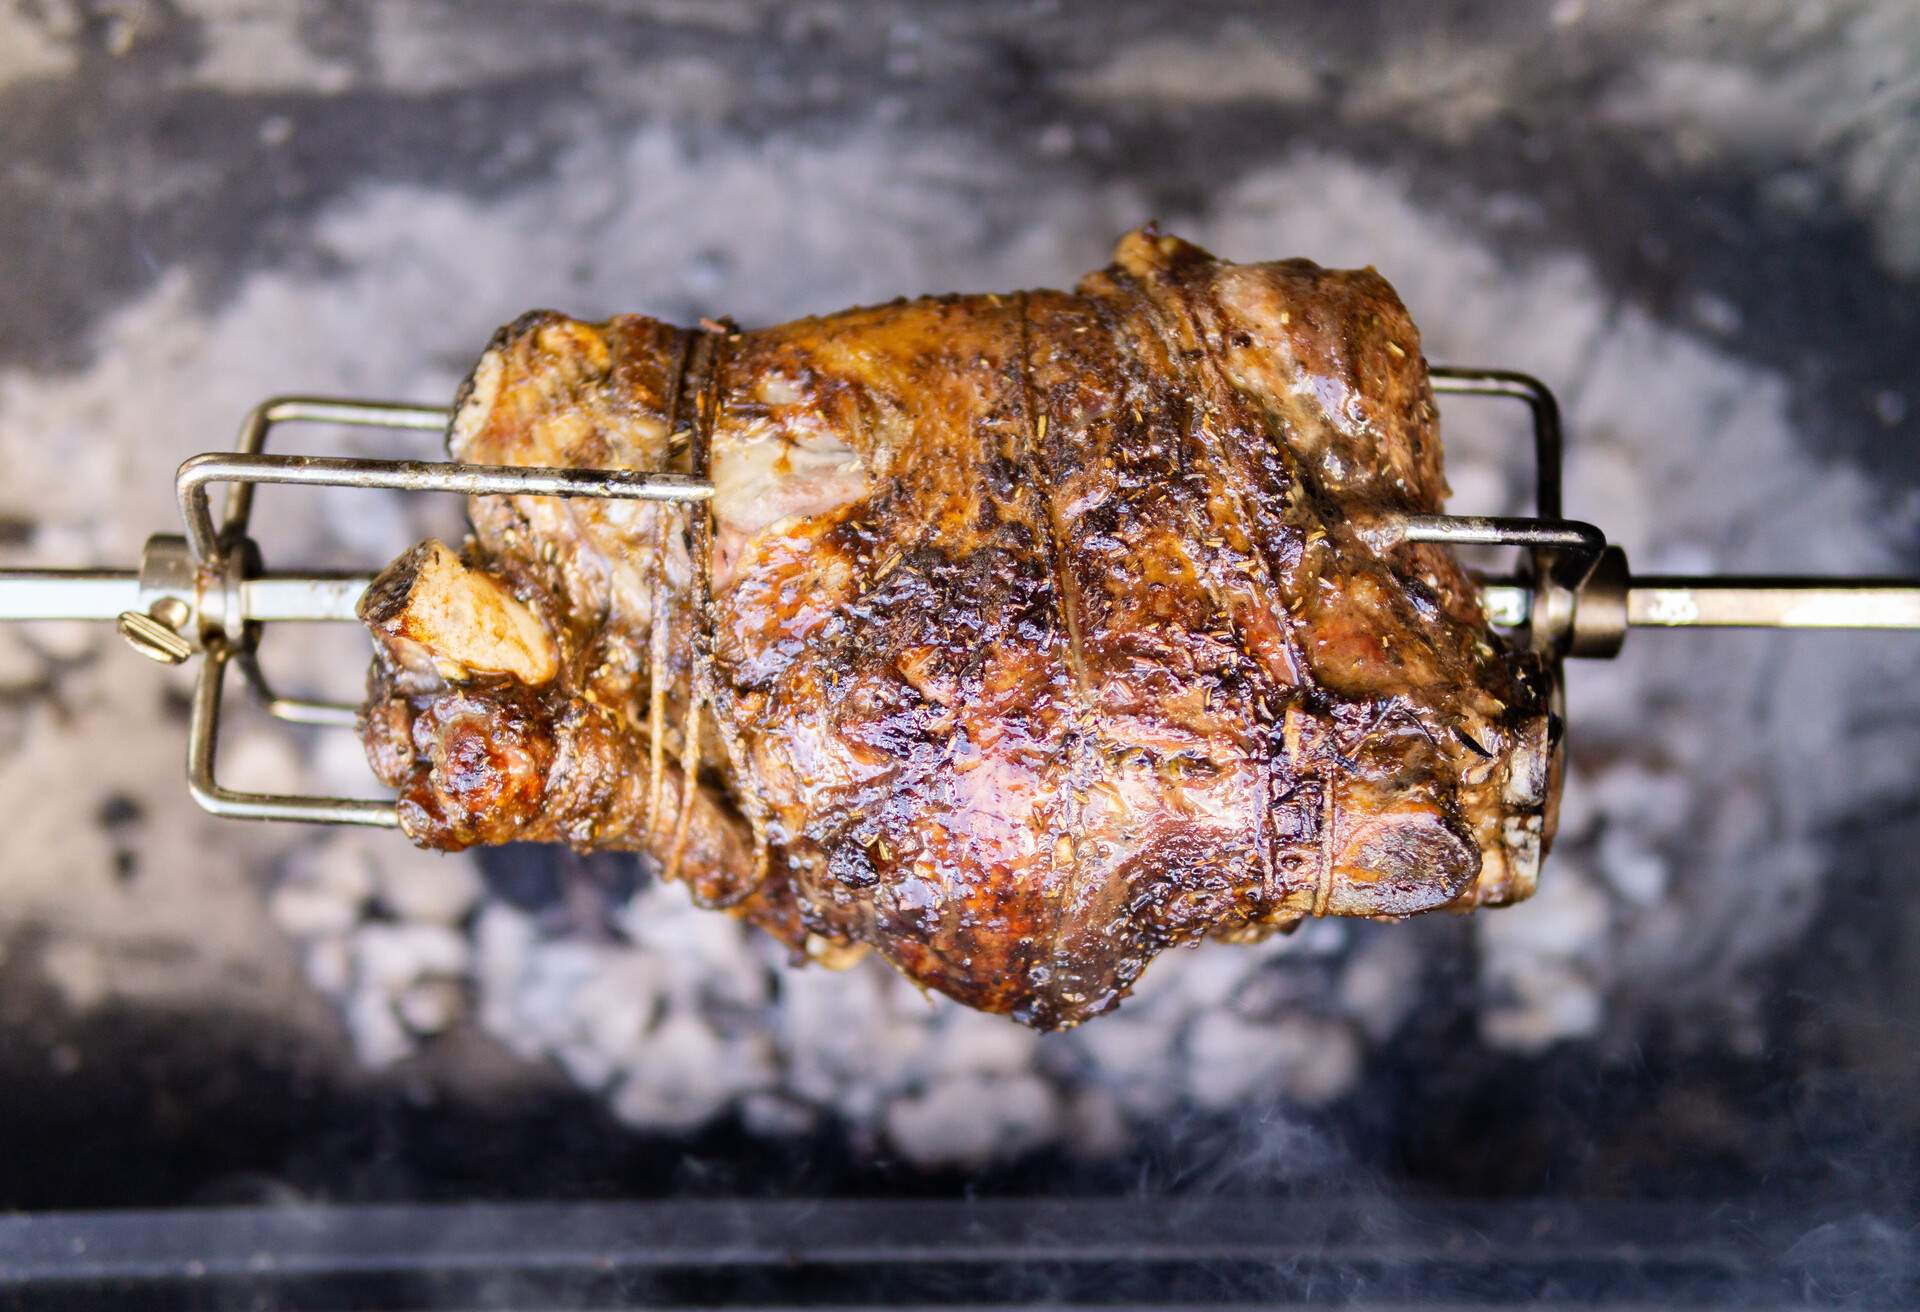 Lamb on the spit.